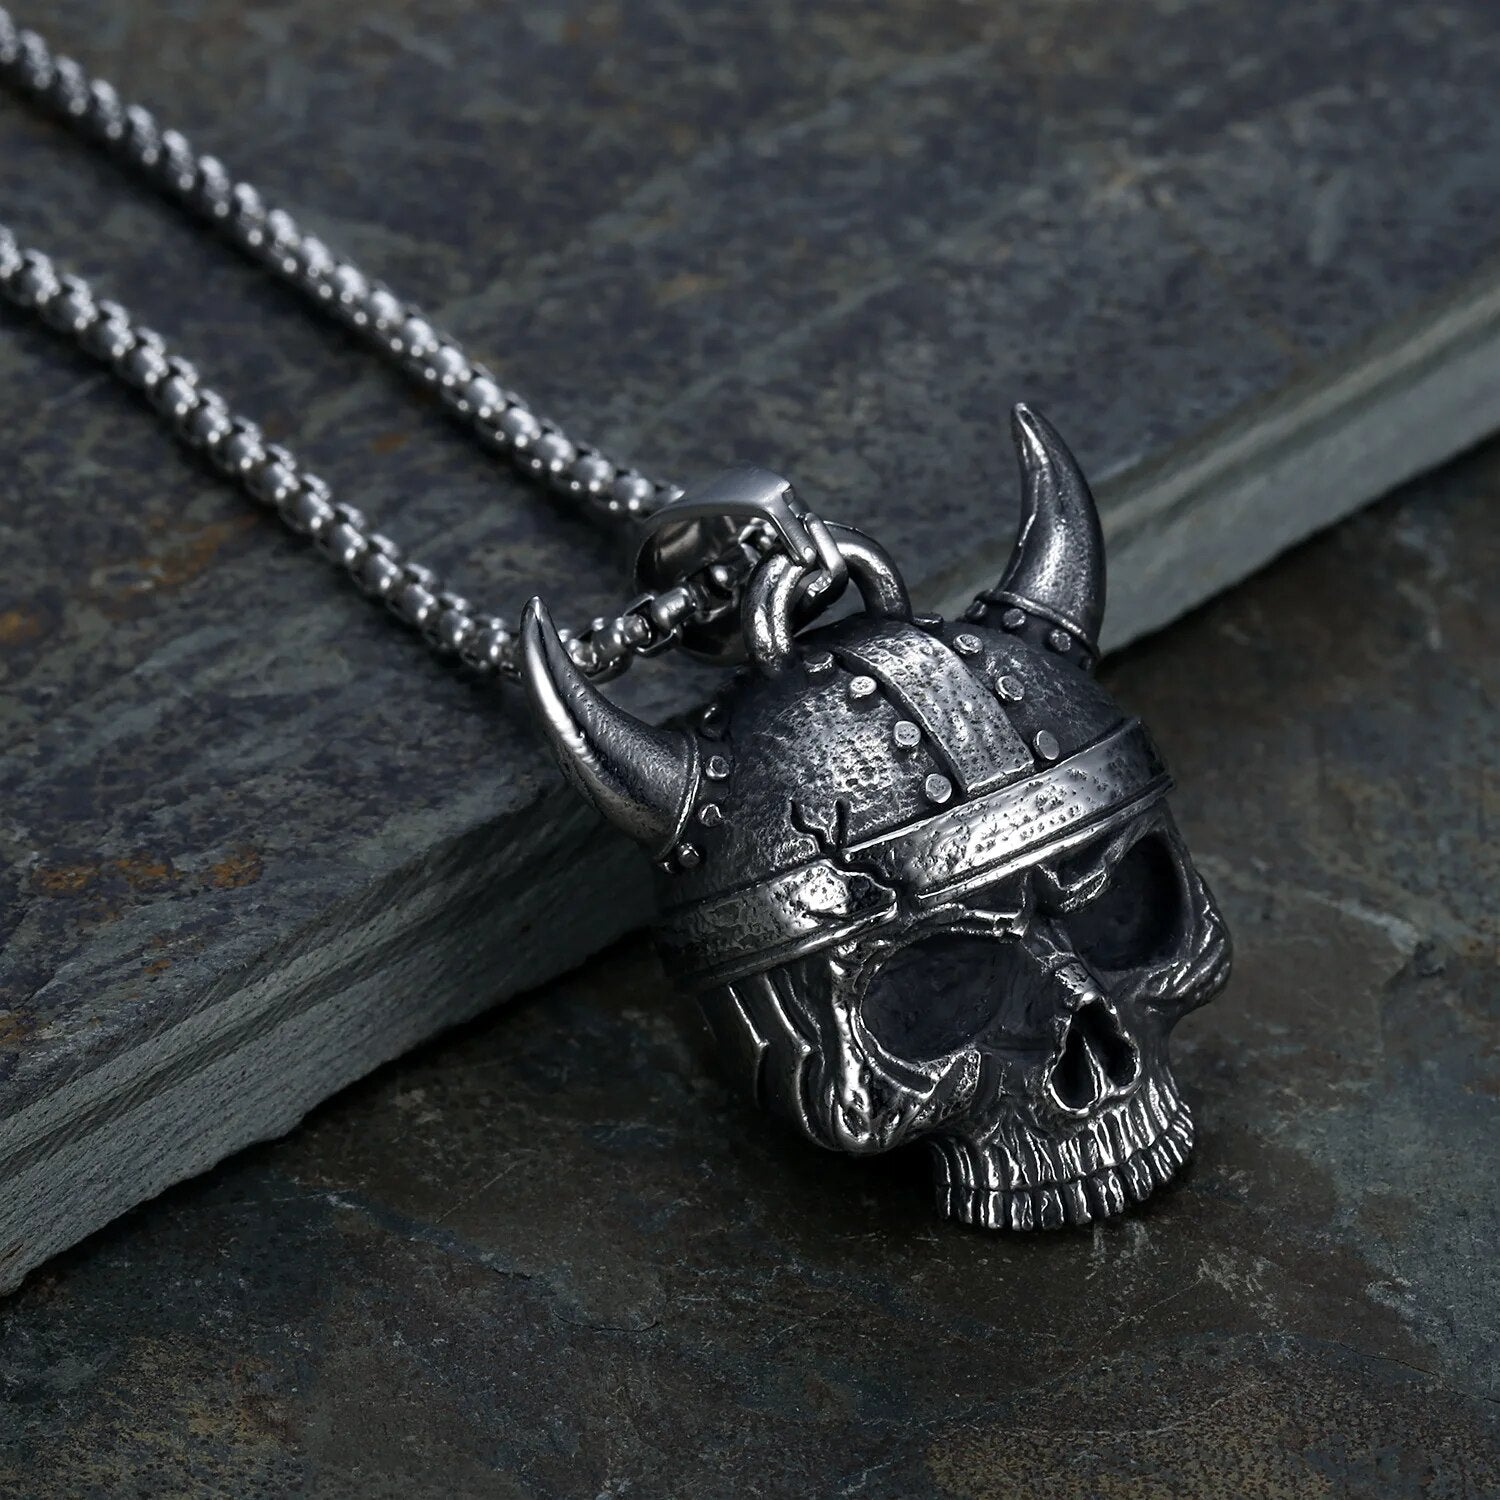 Vleee Classic Domineering Gothic Punk Style: Fashionable Skull Pendant Necklace, a Trendy Choice for Men.